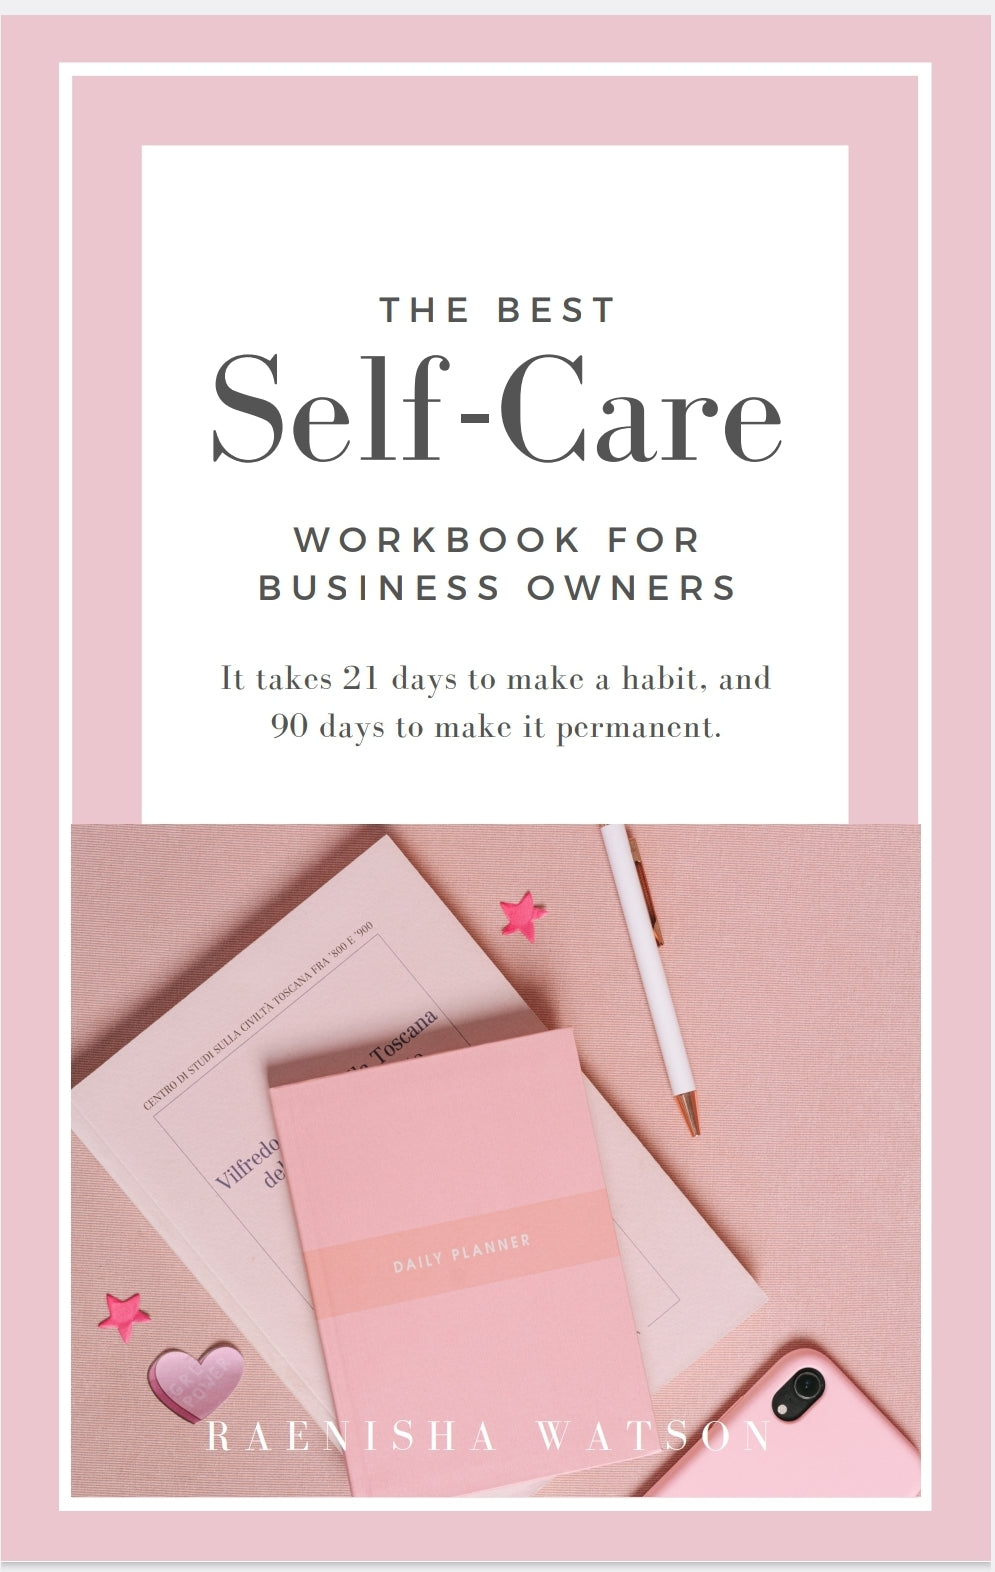 The Best Self-Care Workbook For Business Owners